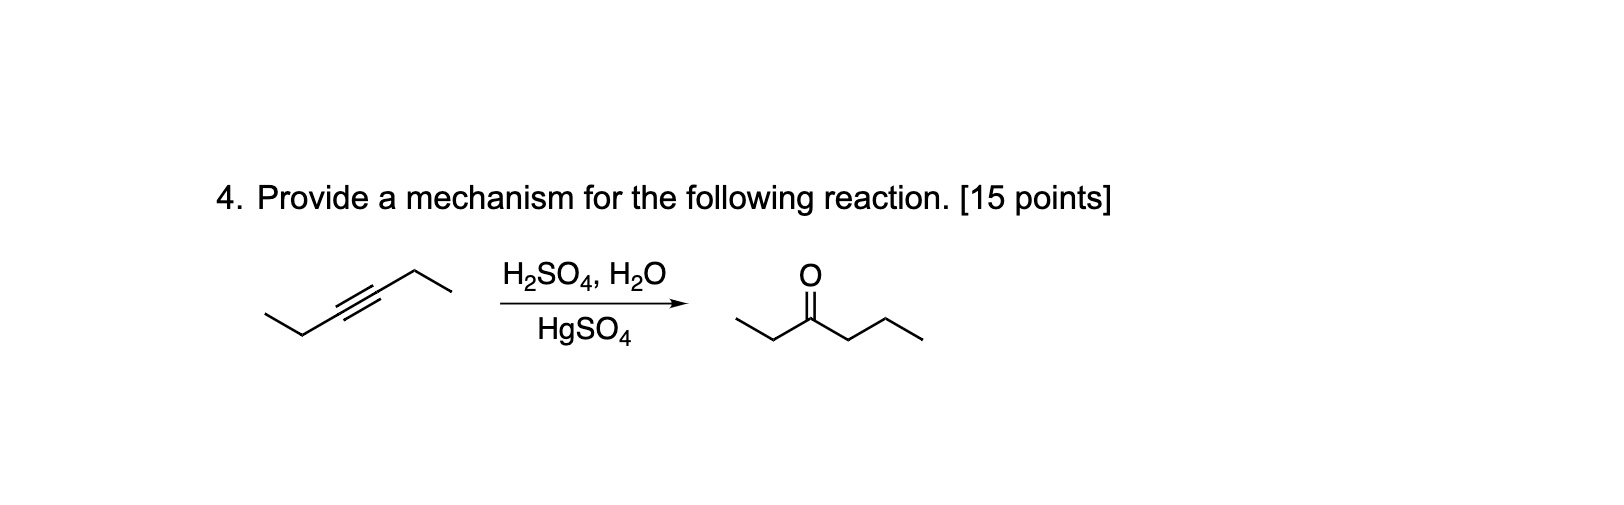 Solved 4. Provide a mechanism for the following reaction. | Chegg.com